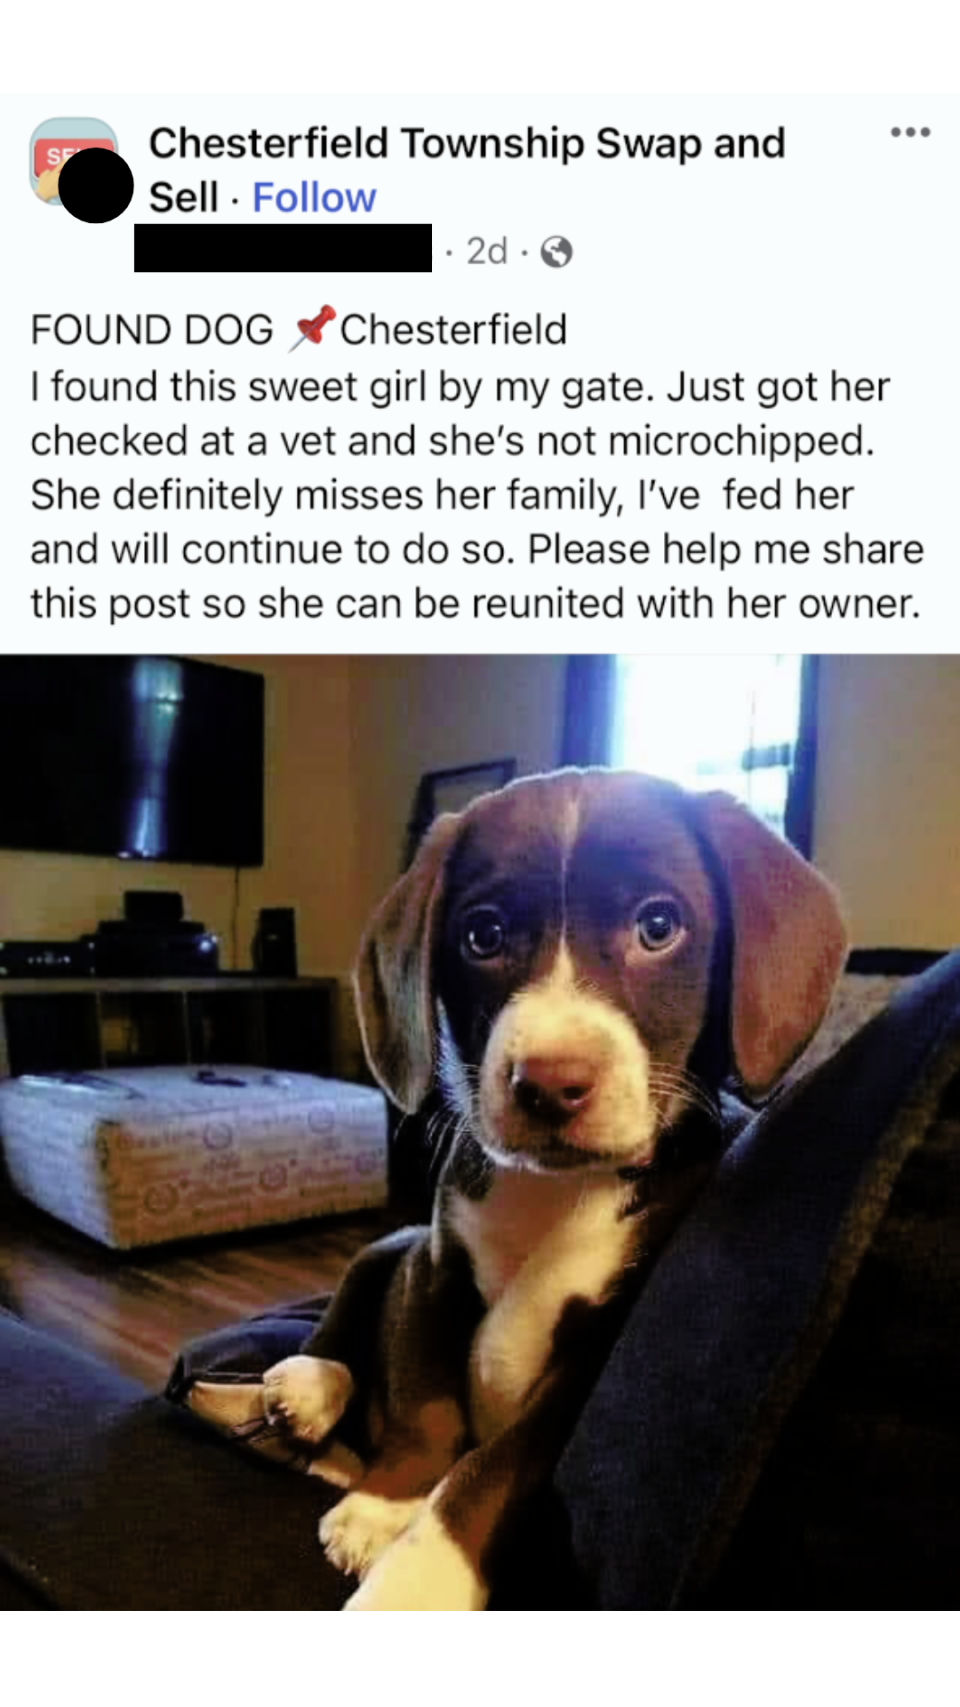 An example of a scam Facebook post using pictures of injured animals as a way to target animal lovers.